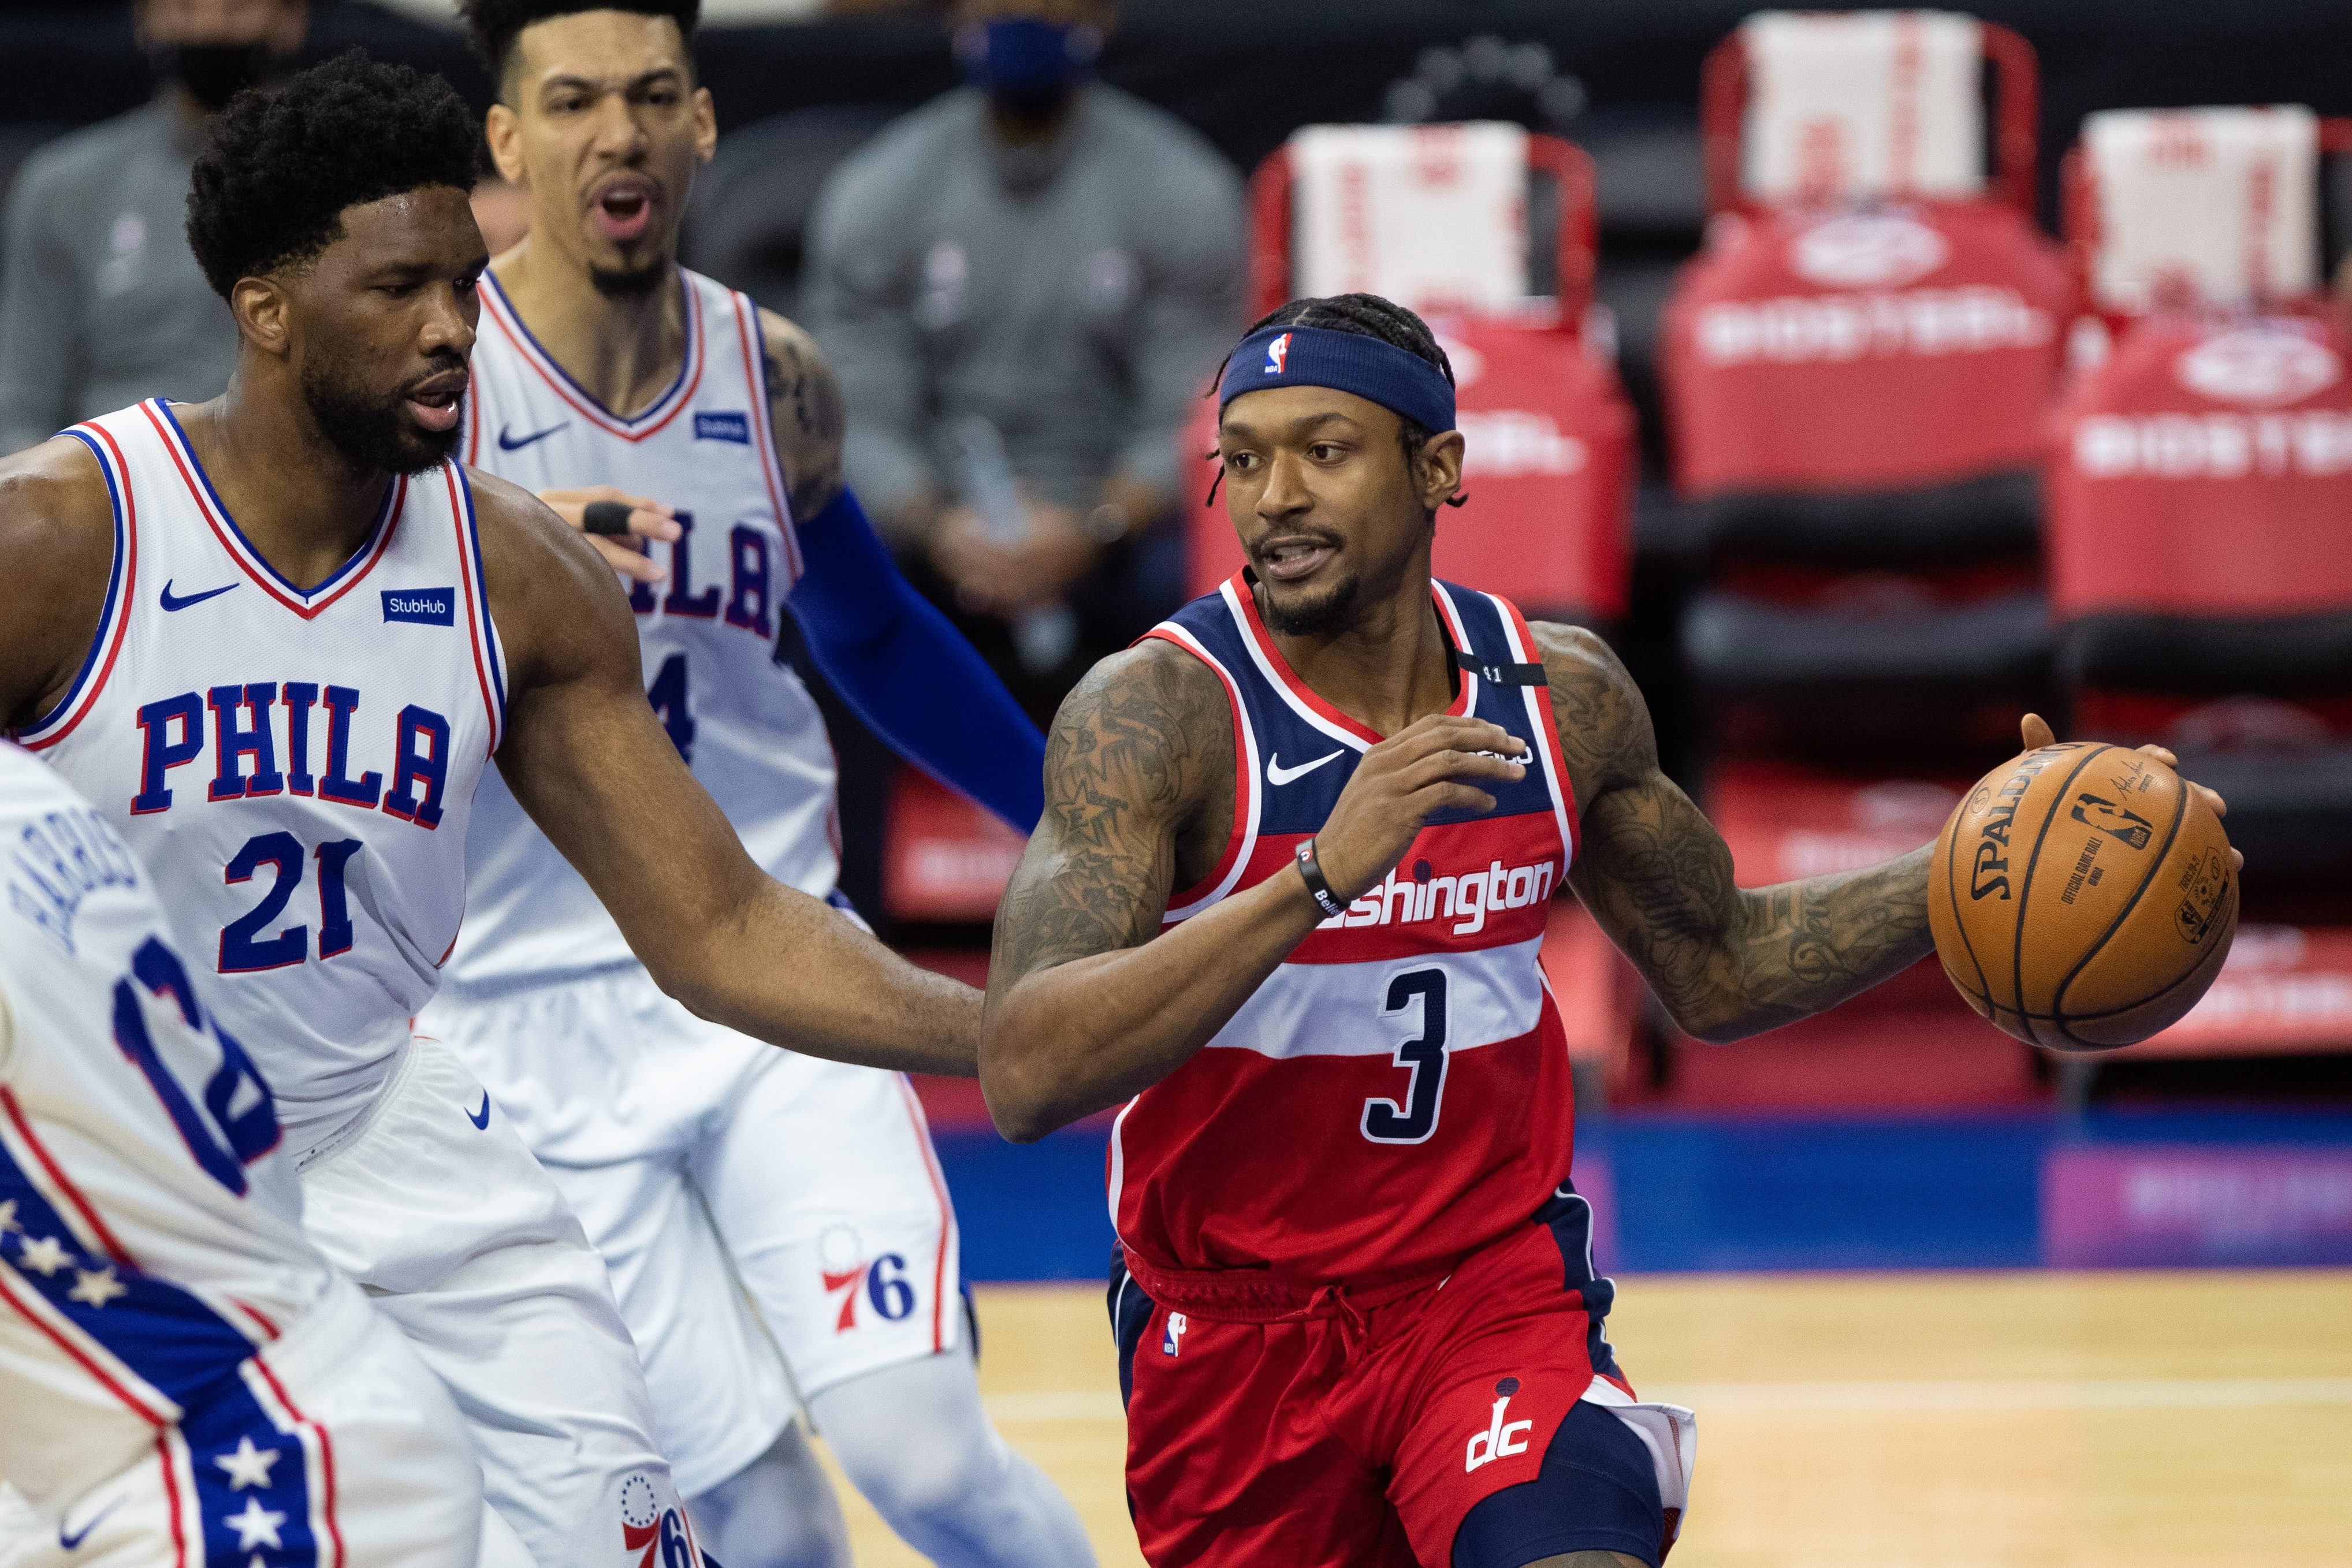 Wizards star Beal drops career, franchise-best 60 in Sixers loss